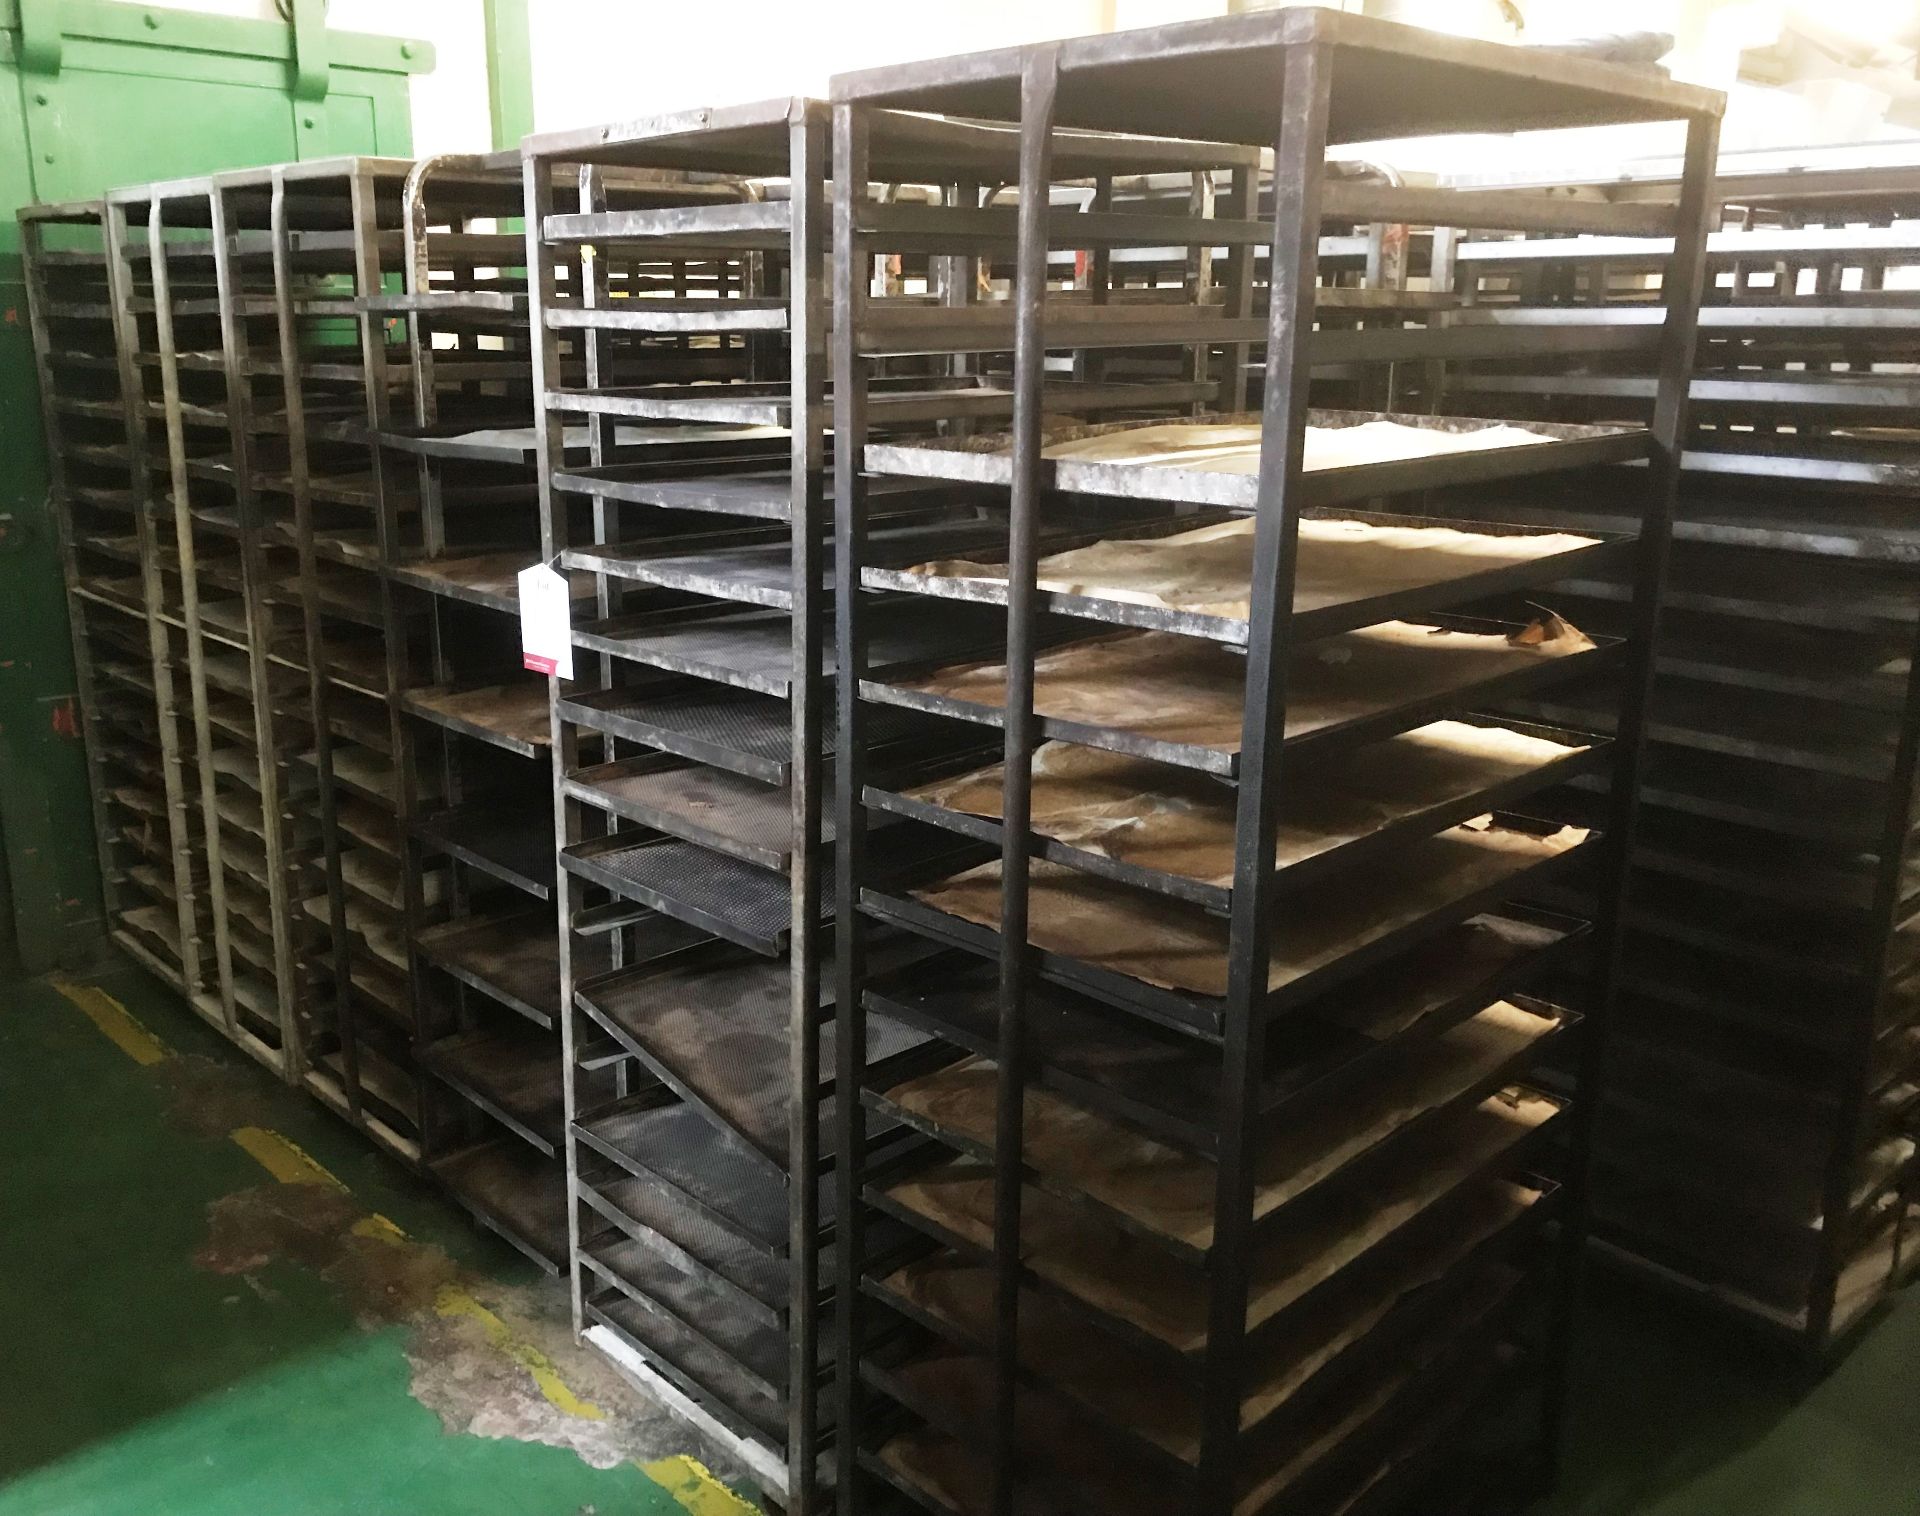 13 x Various Bakery Racks & Trays - As Pictured